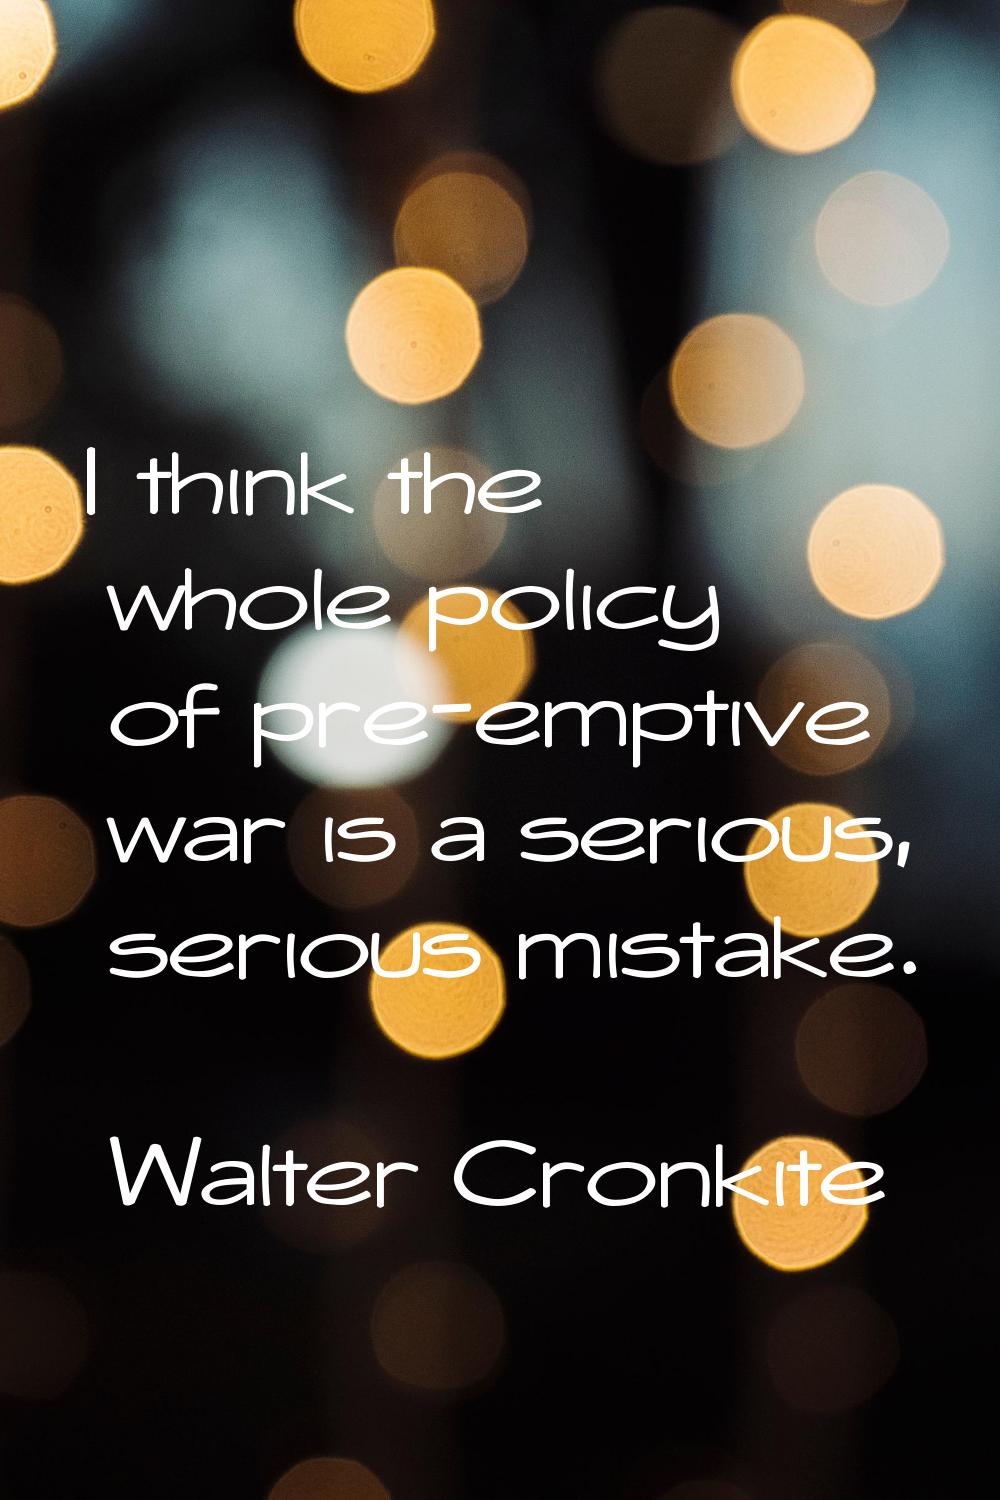 I think the whole policy of pre-emptive war is a serious, serious mistake.